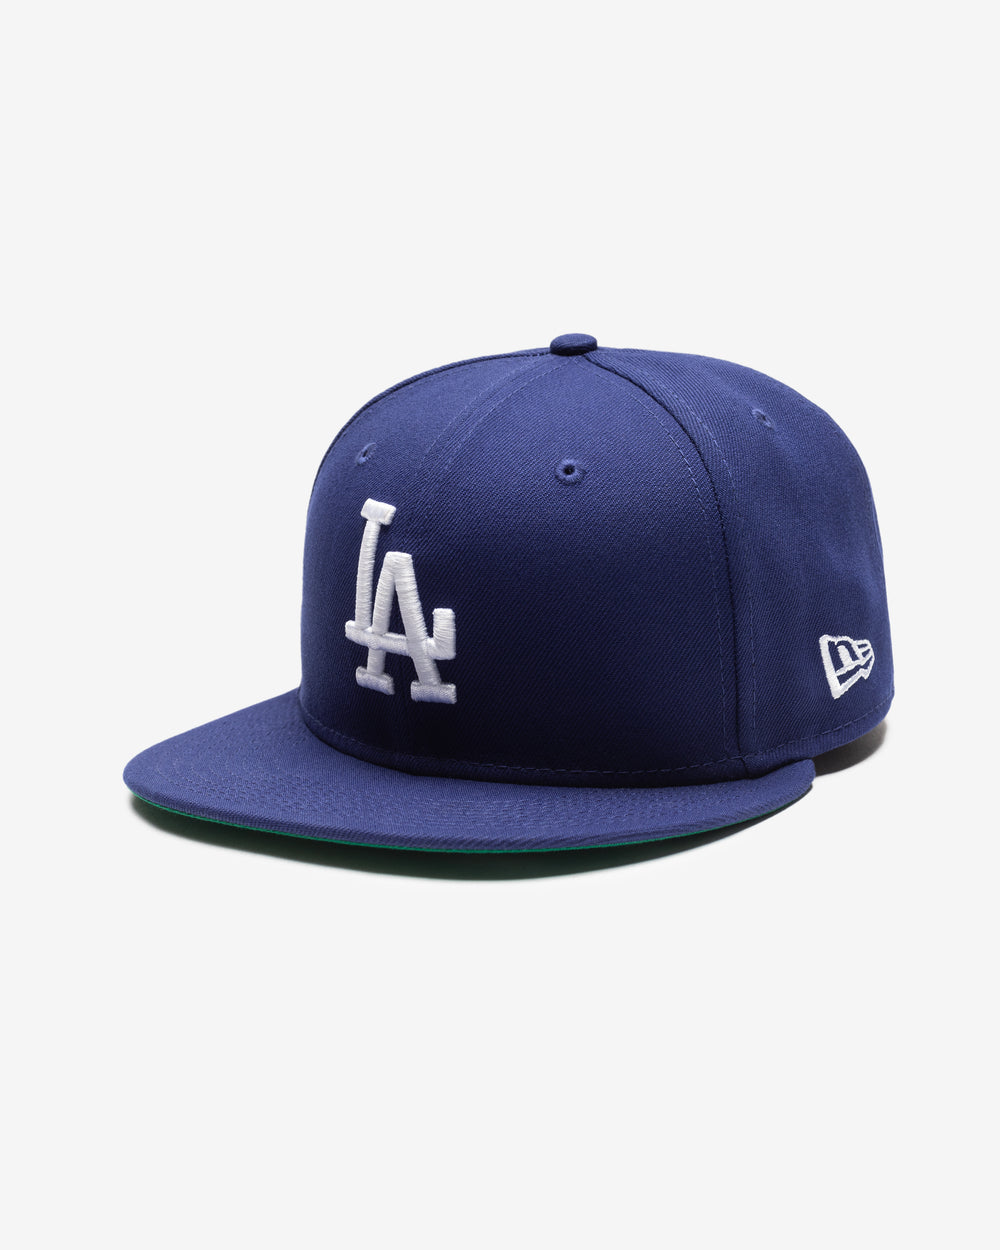 UNDEFEATED X LA DODGERS WORLD CHAMPIONS NEW ERA 59FIFTY FITTED - DARK ROYAL  / 6 7/8